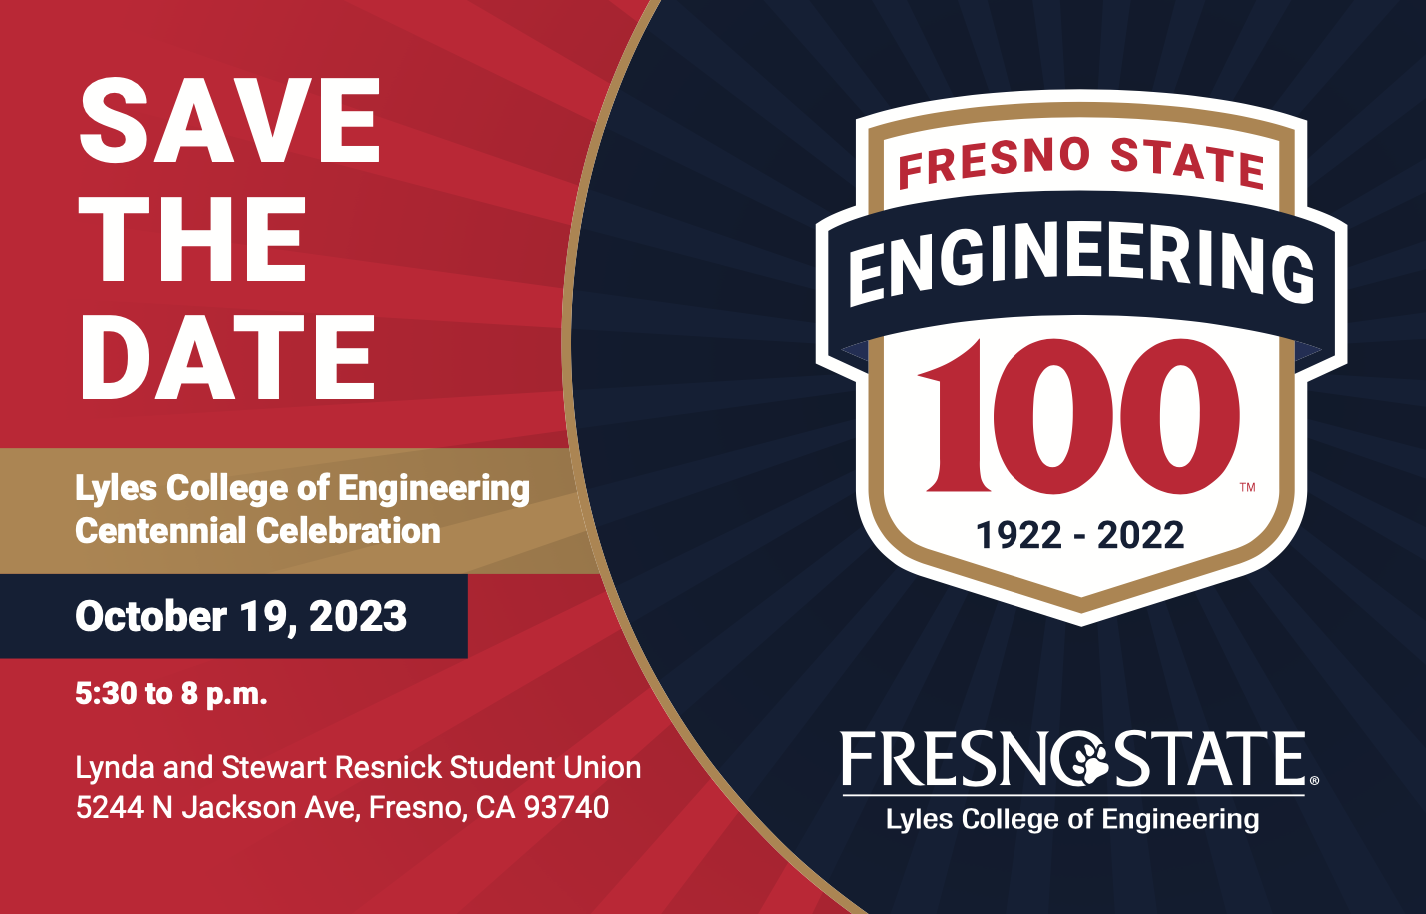 Save the date. Lyles College of Engineering Centennial Celebration October 19, 2023 5:30 - 8 p.m. Resnick Student Union at Fresno State